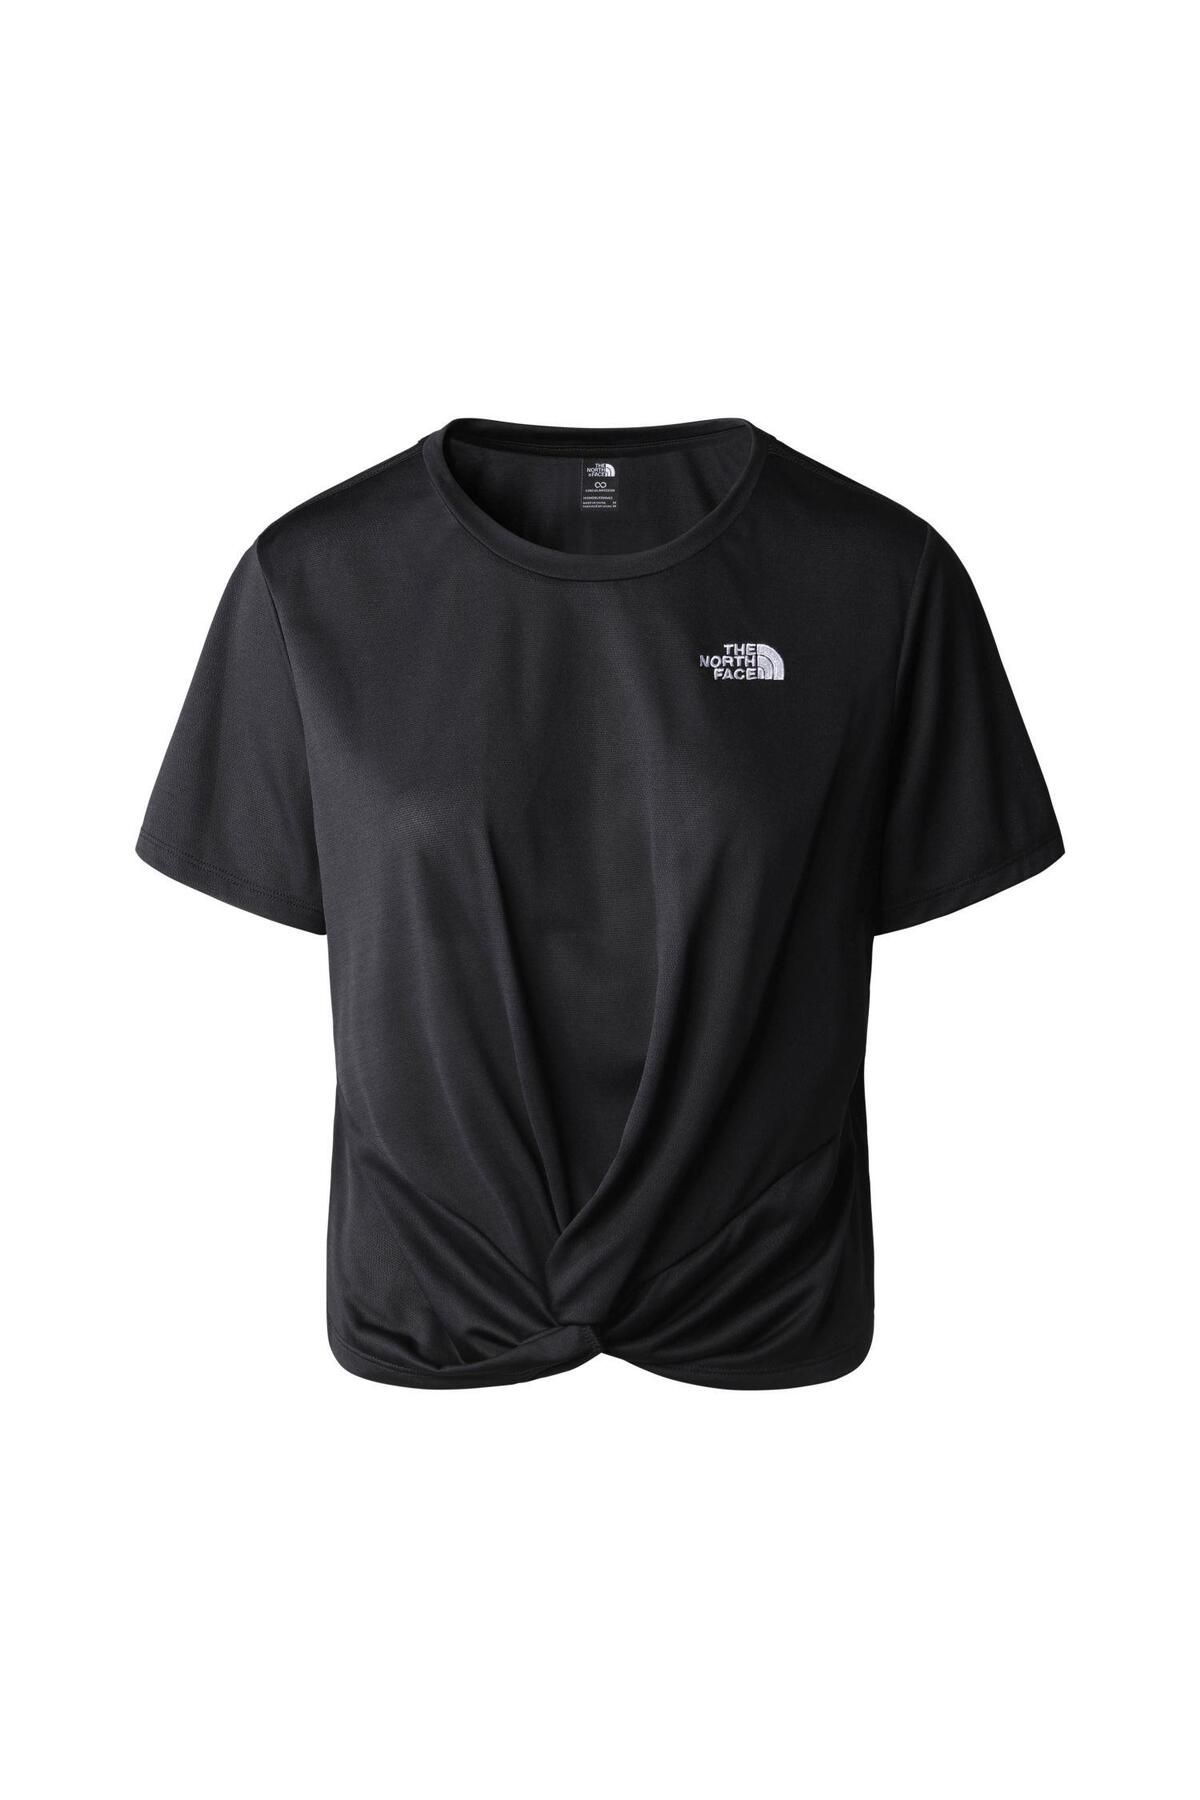 The North Face W FOUNDATION CROP TEE - EU  Shirt NF0A824IKX71 Siyah-S